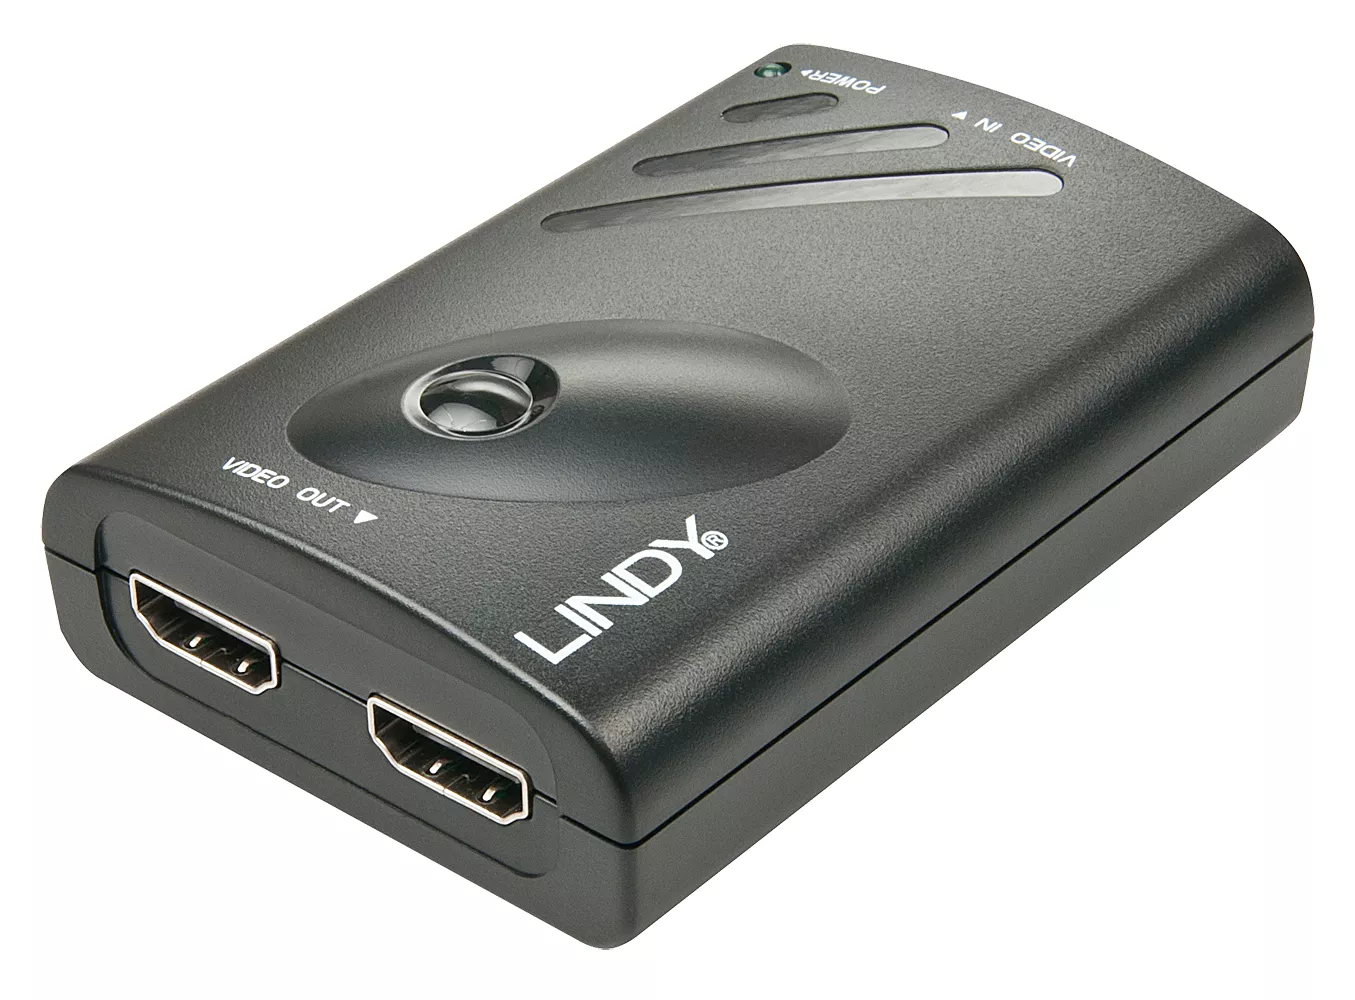 Achat Câble Audio LINDY DP 1.2 to 2x HDMI Converter with Expander Function sur hello RSE